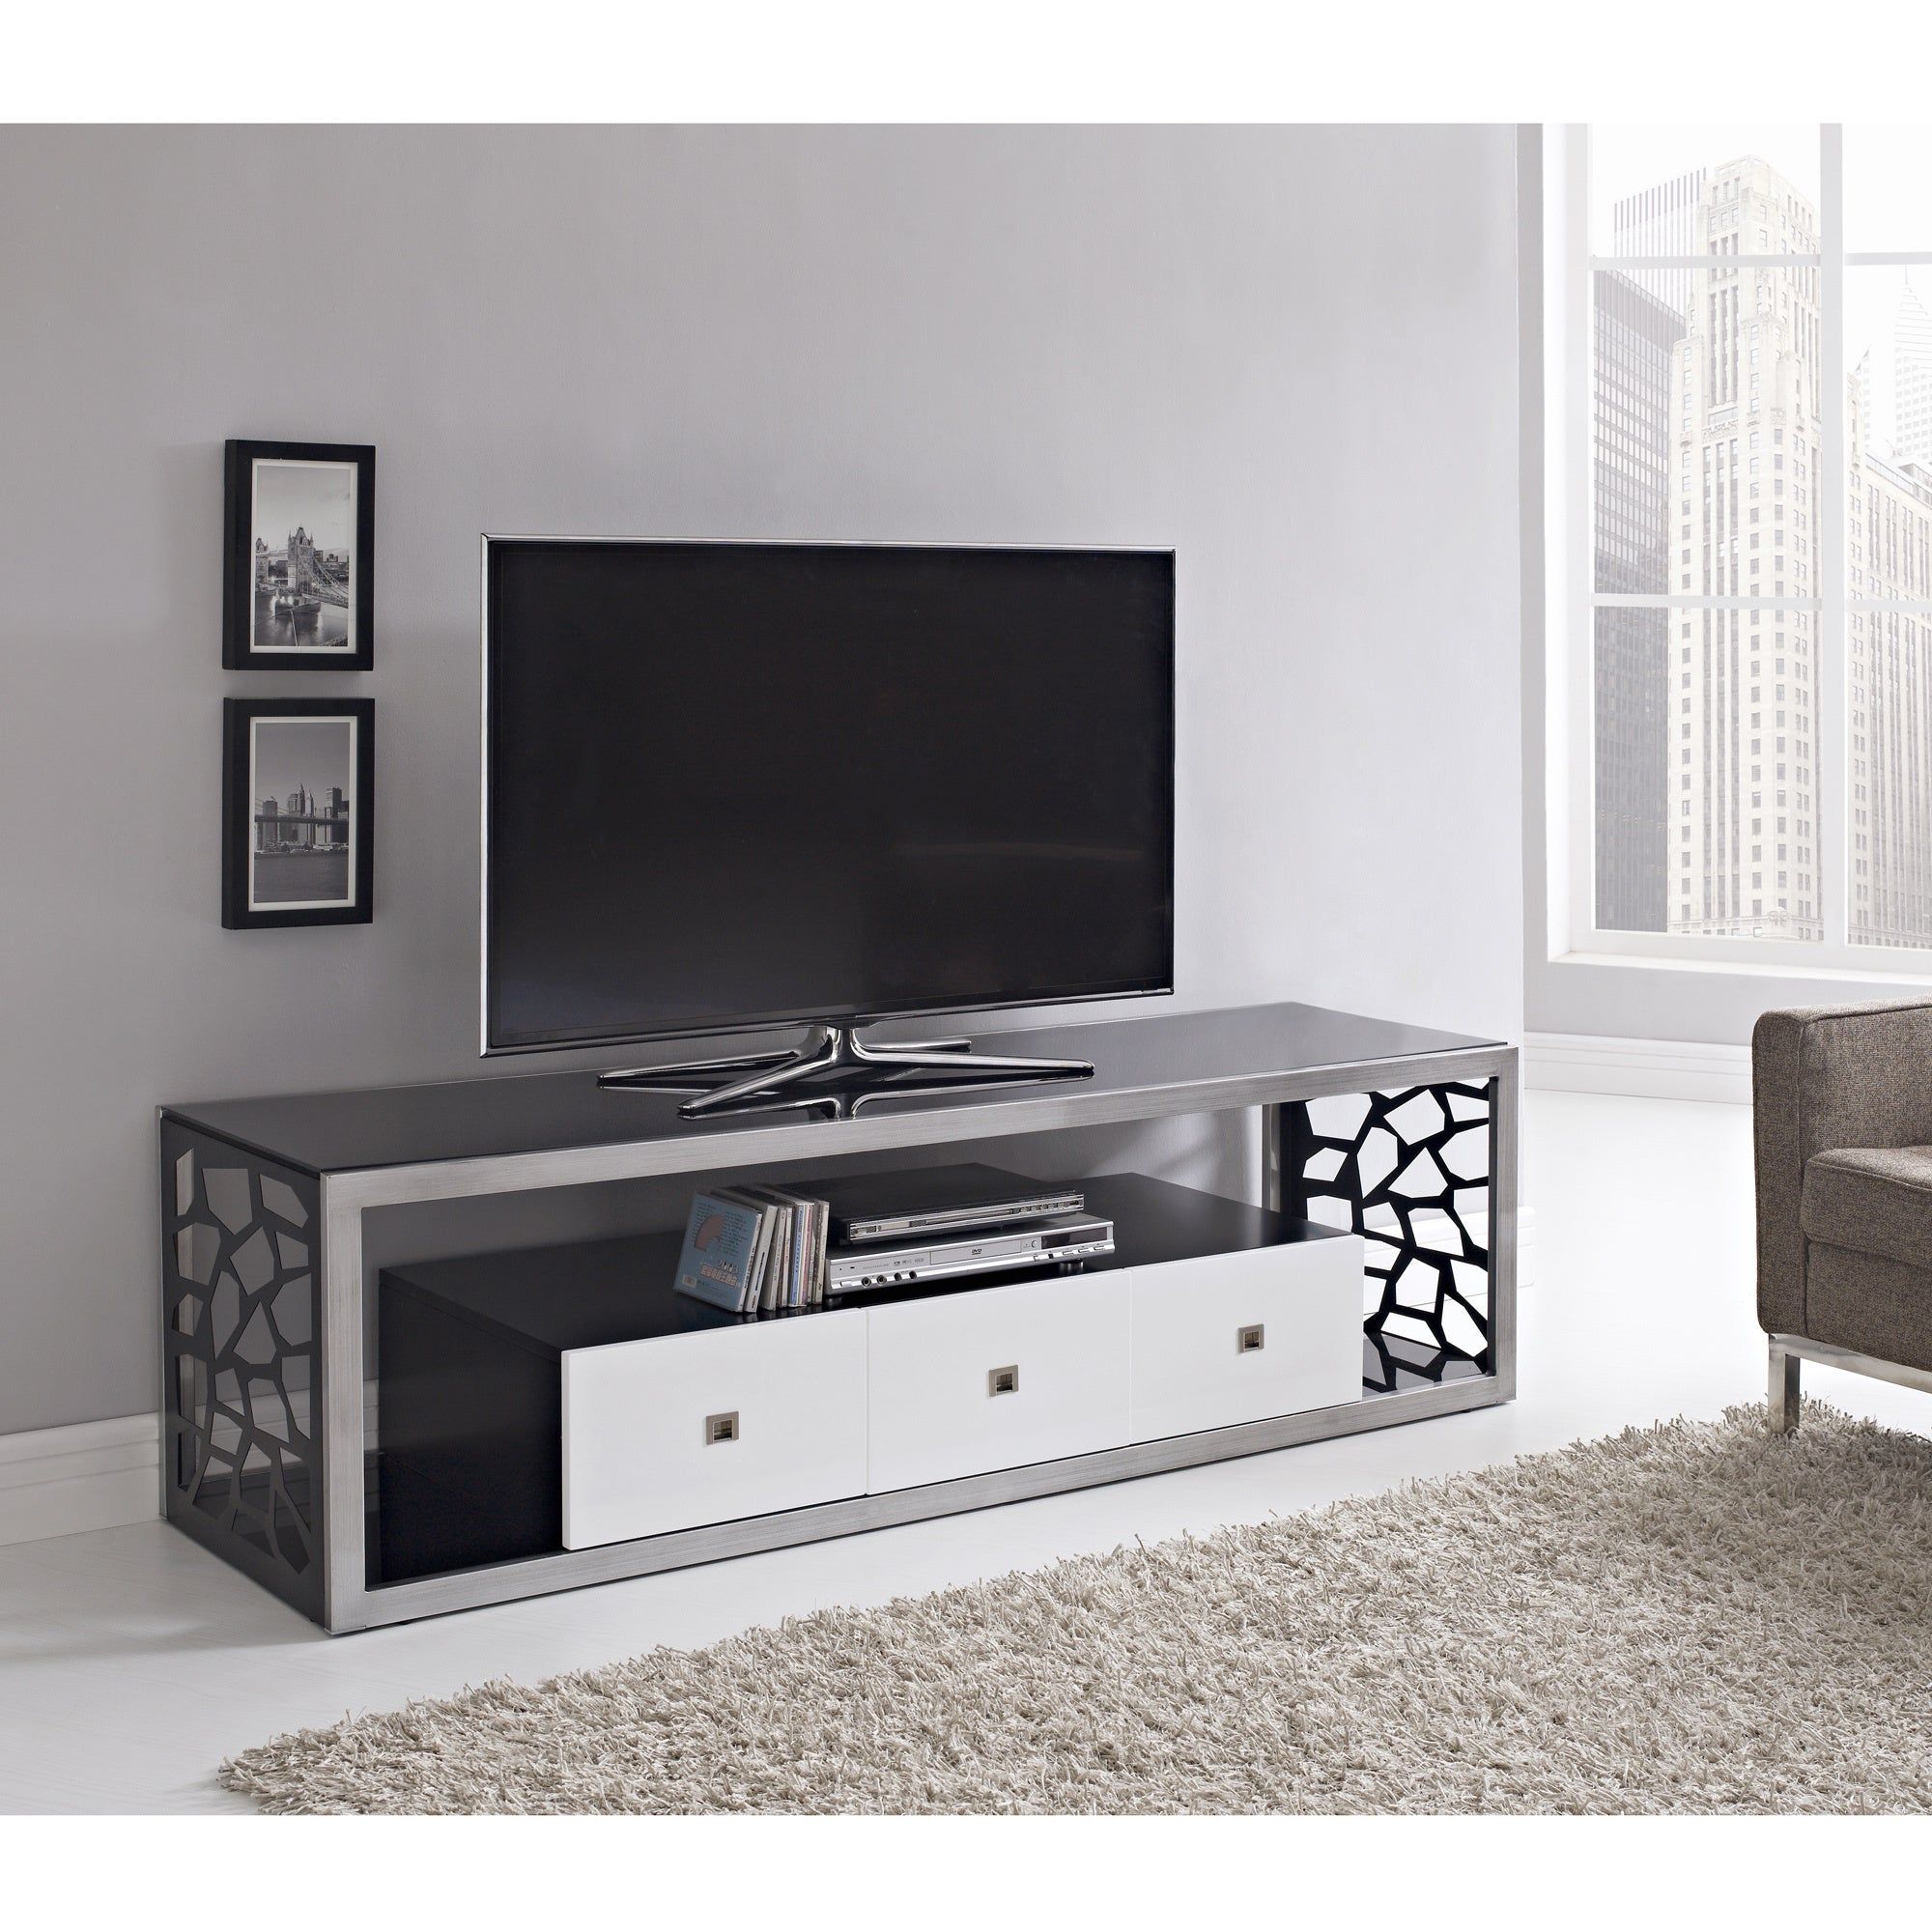 Black Glass Modern 70 Inch Tv Stand – Overstock™ Shopping With Black Modern Tv Stands (View 10 of 15)